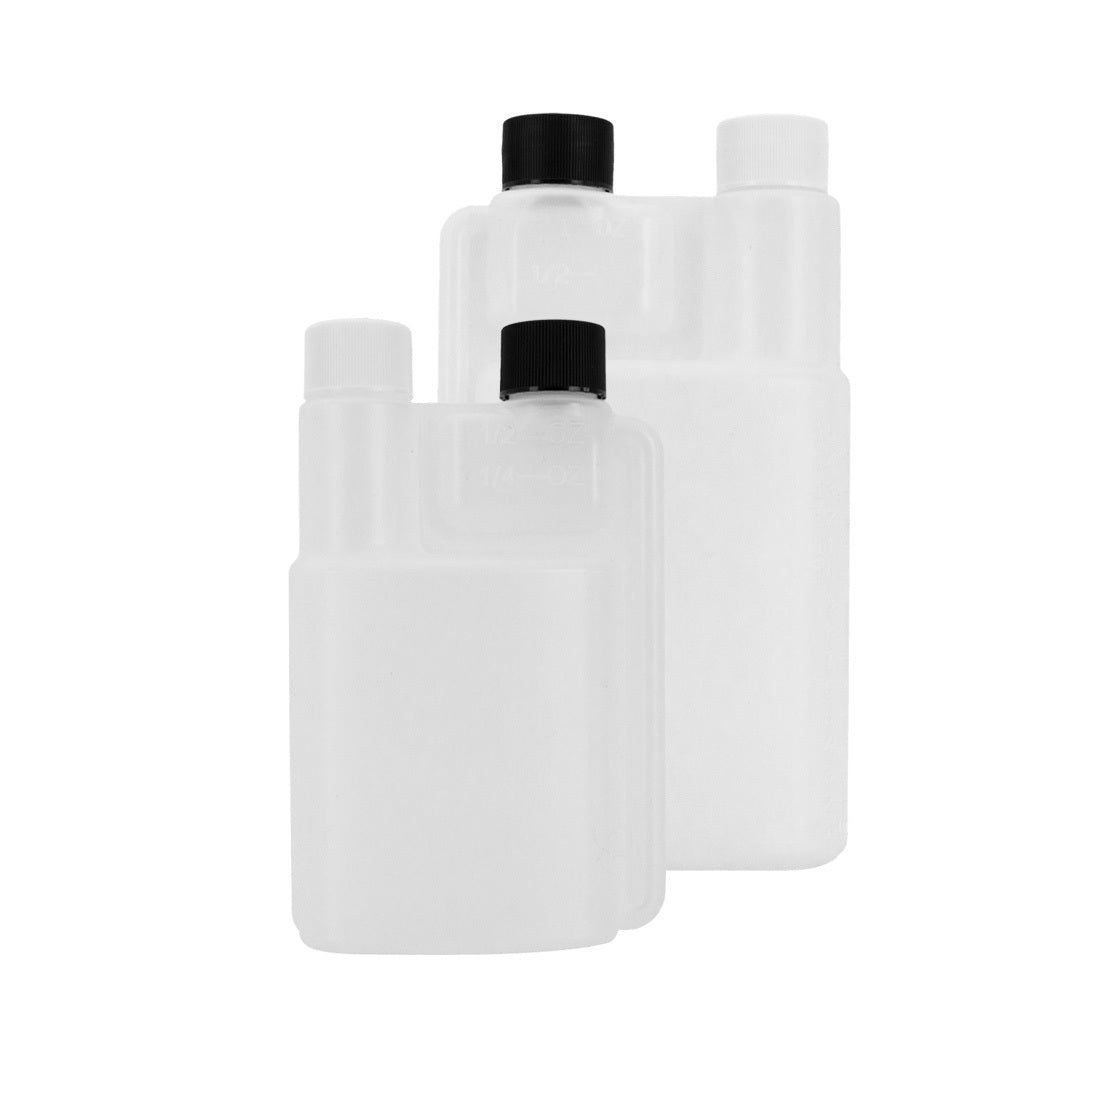 World Enterprises Floater Bottle Sizing - 8ox and 16oz Comparision Front View